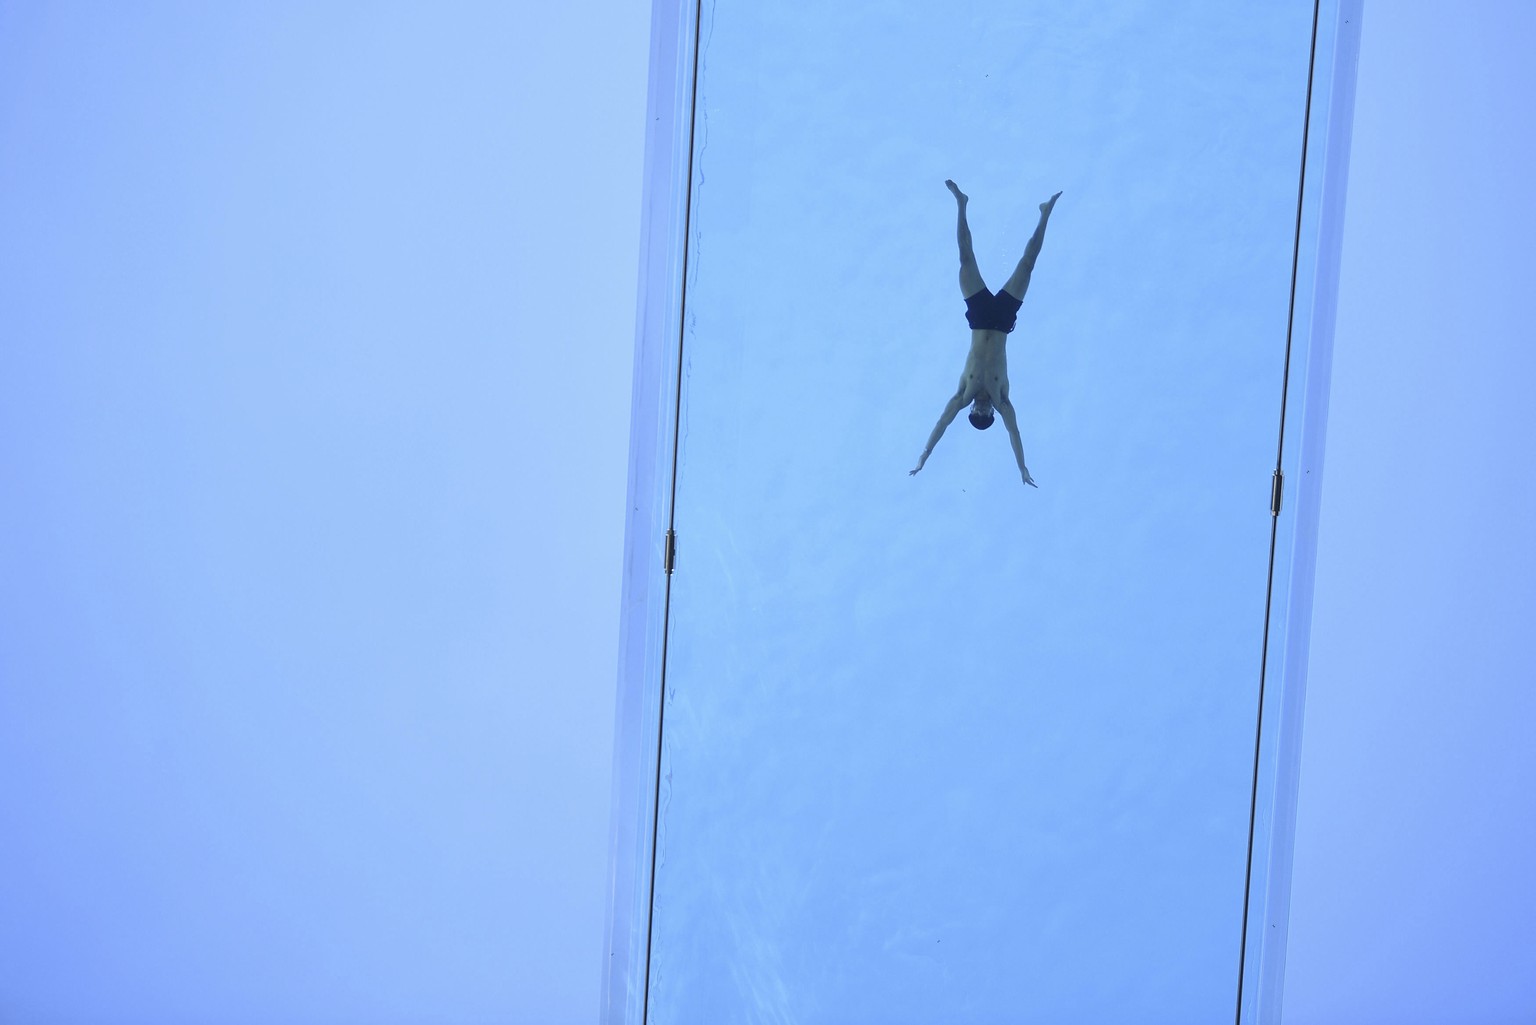 A man swims across the Sky Pool, a transparent swimming pool bridge that spans between two exclusive residential blocks in the Nine Elms area of London, Friday April 23, 2021. The first of its kind, t ...